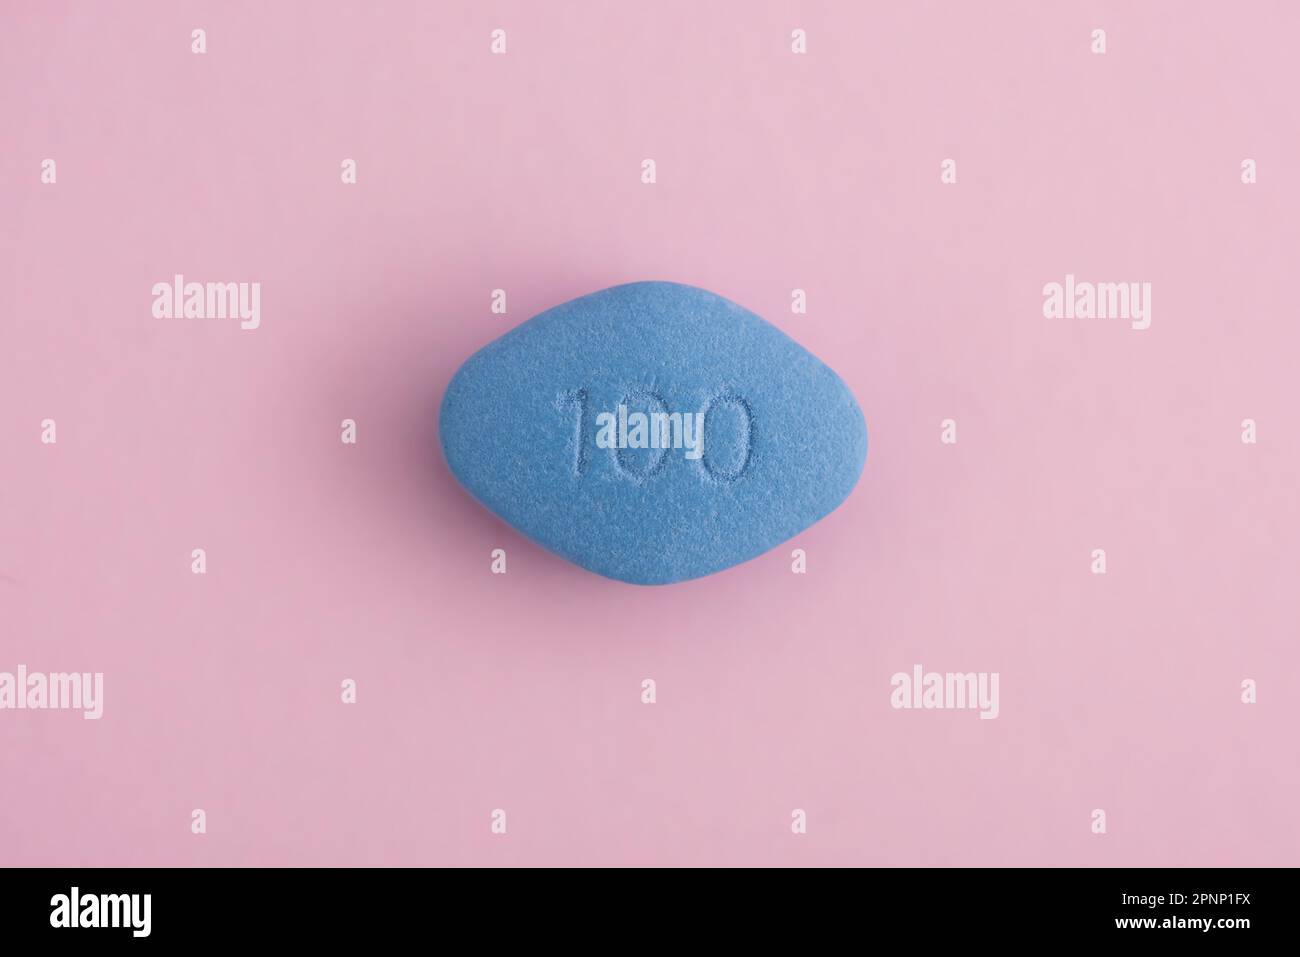 Blue pill on pink background. Medicine concept of medication for potency, erection, treatment of erectile dysfunction. Top view. Macro shot Stock Photo